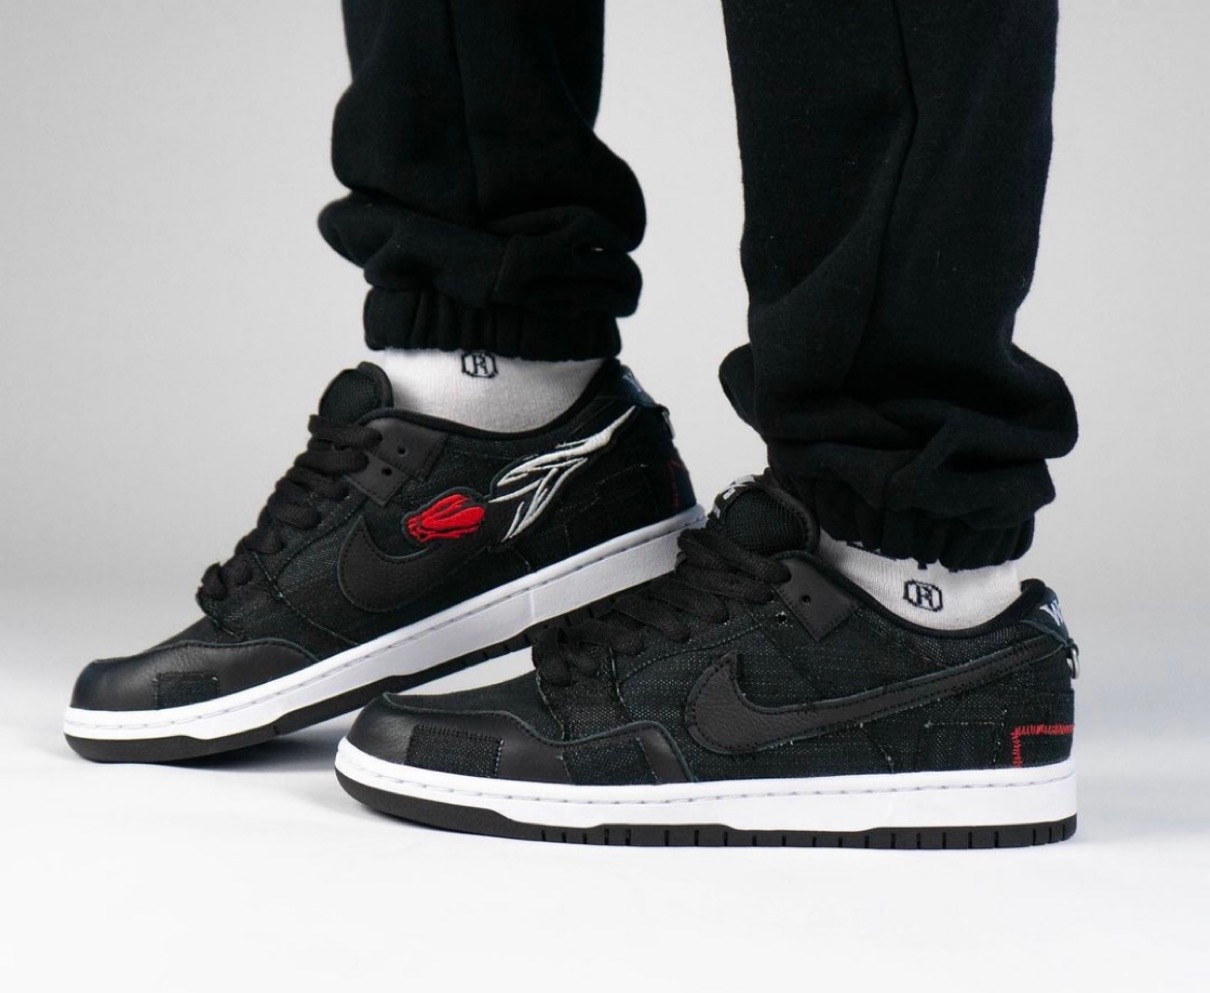 Nike SB × Wasted Youth】Dunk Low Pro QSが2021年4月1日より発売予定 | UP TO DATE